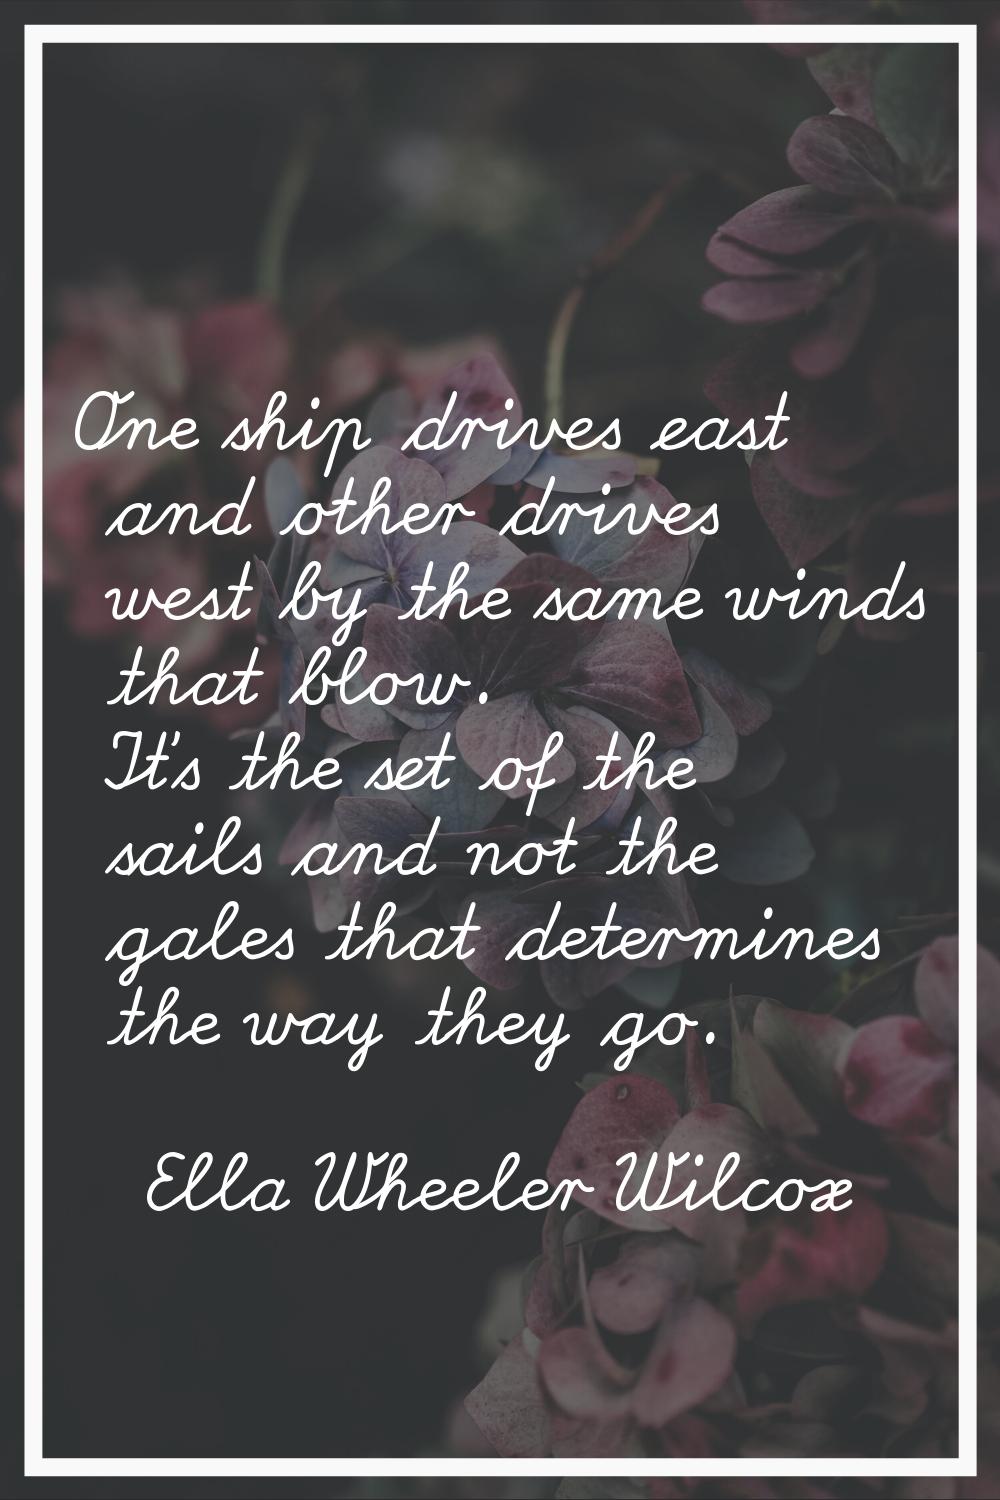 One ship drives east and other drives west by the same winds that blow. It's the set of the sails a